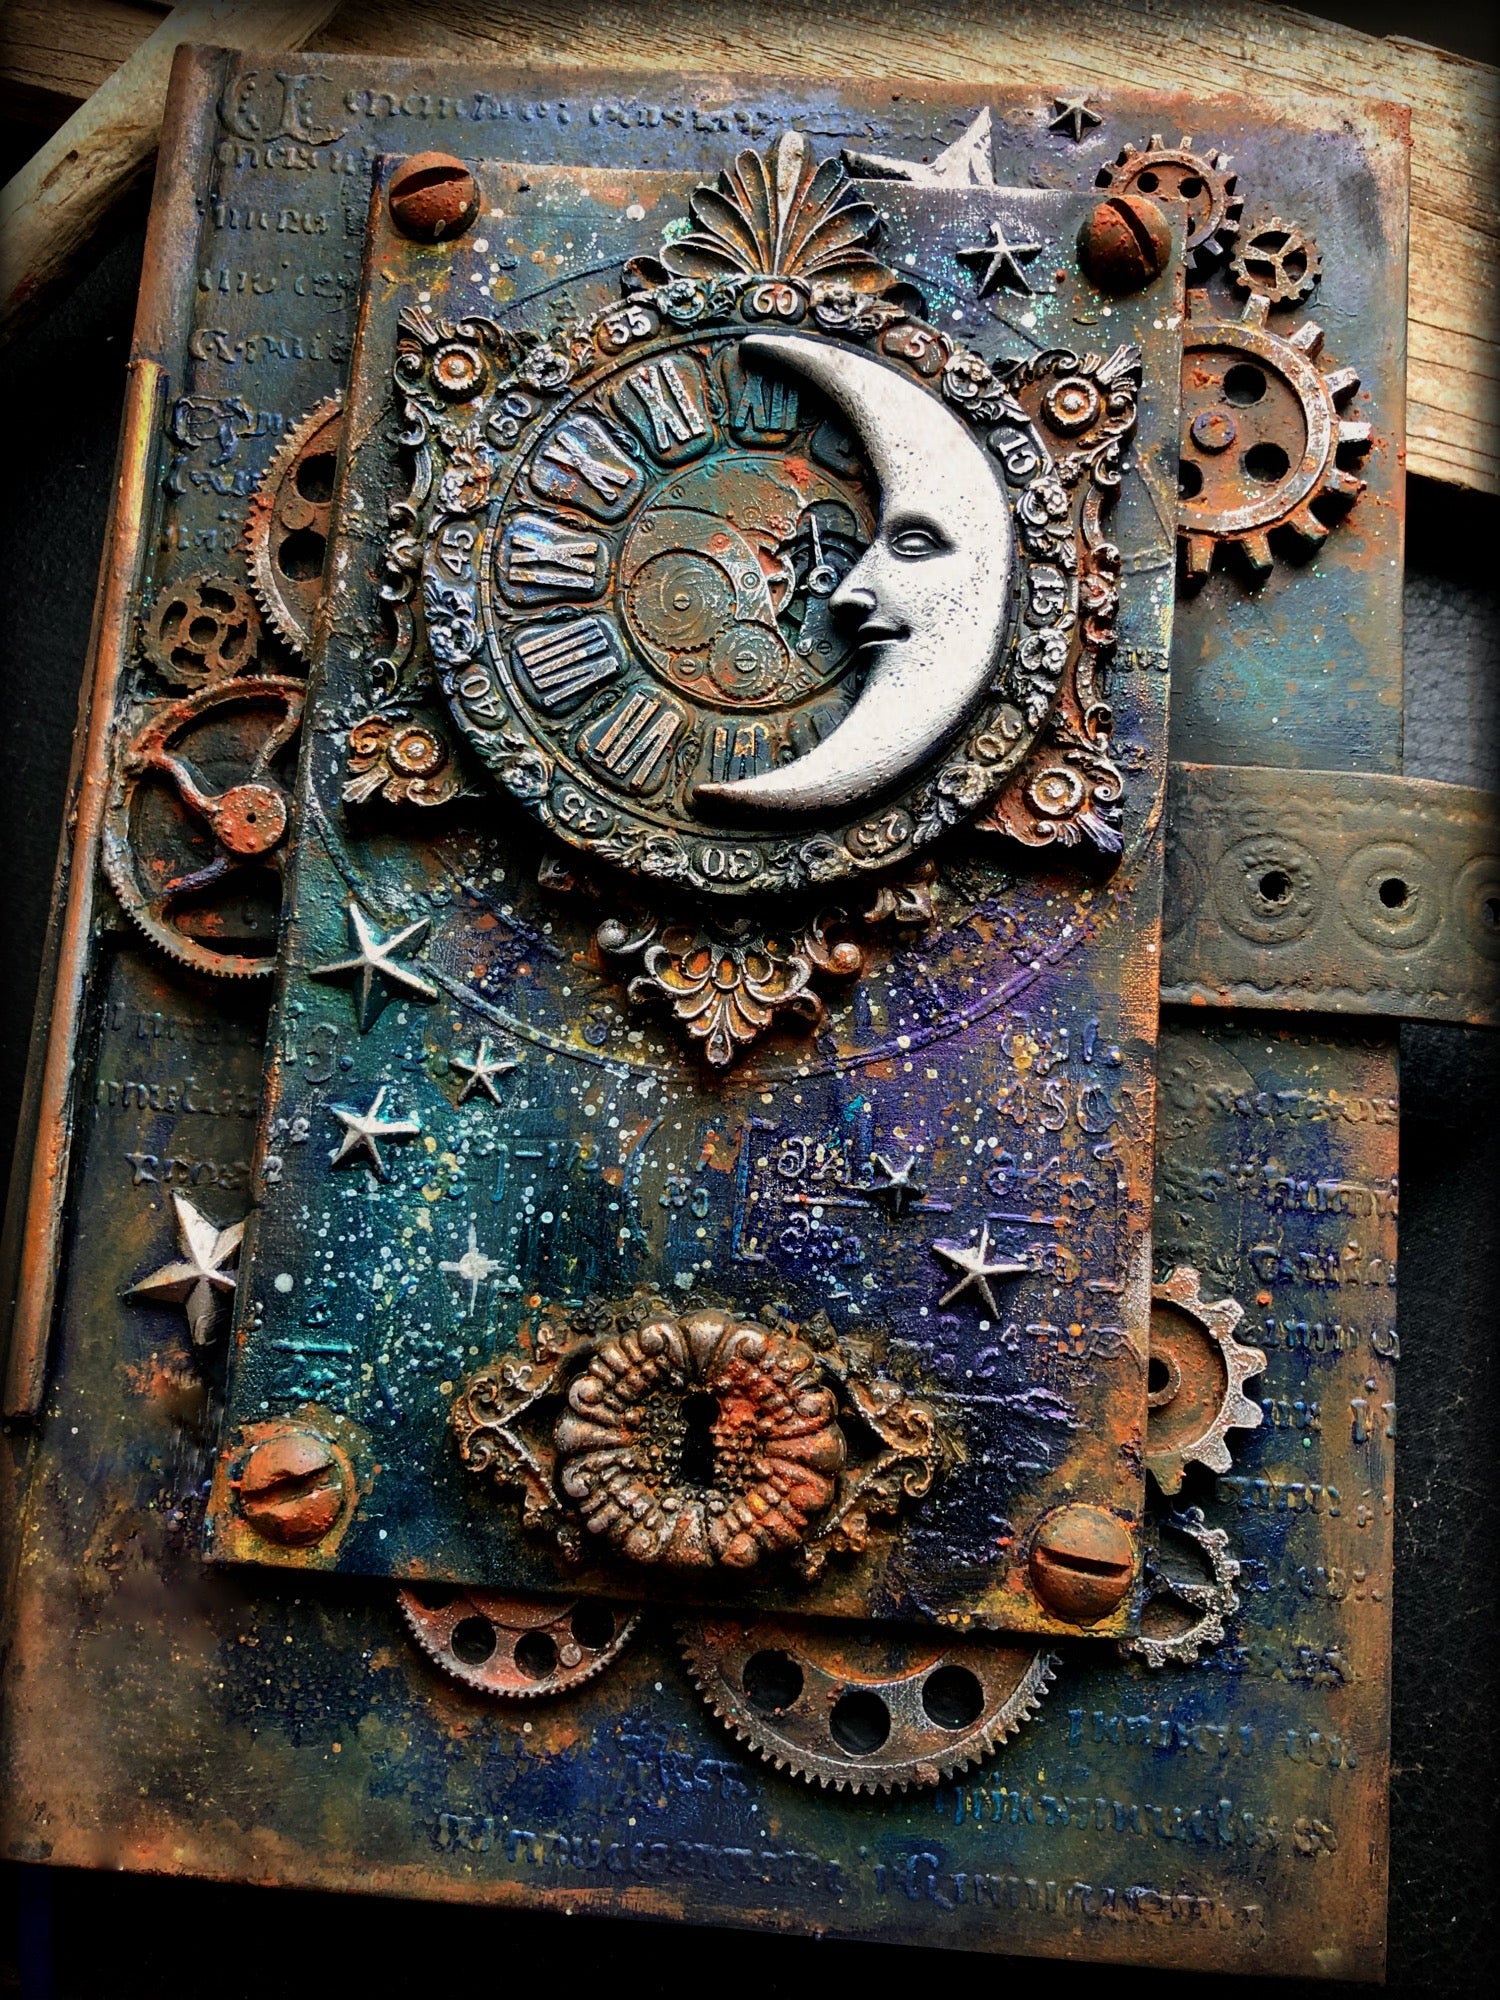 Grimoire /spell book class by LOUISE CROSBIE